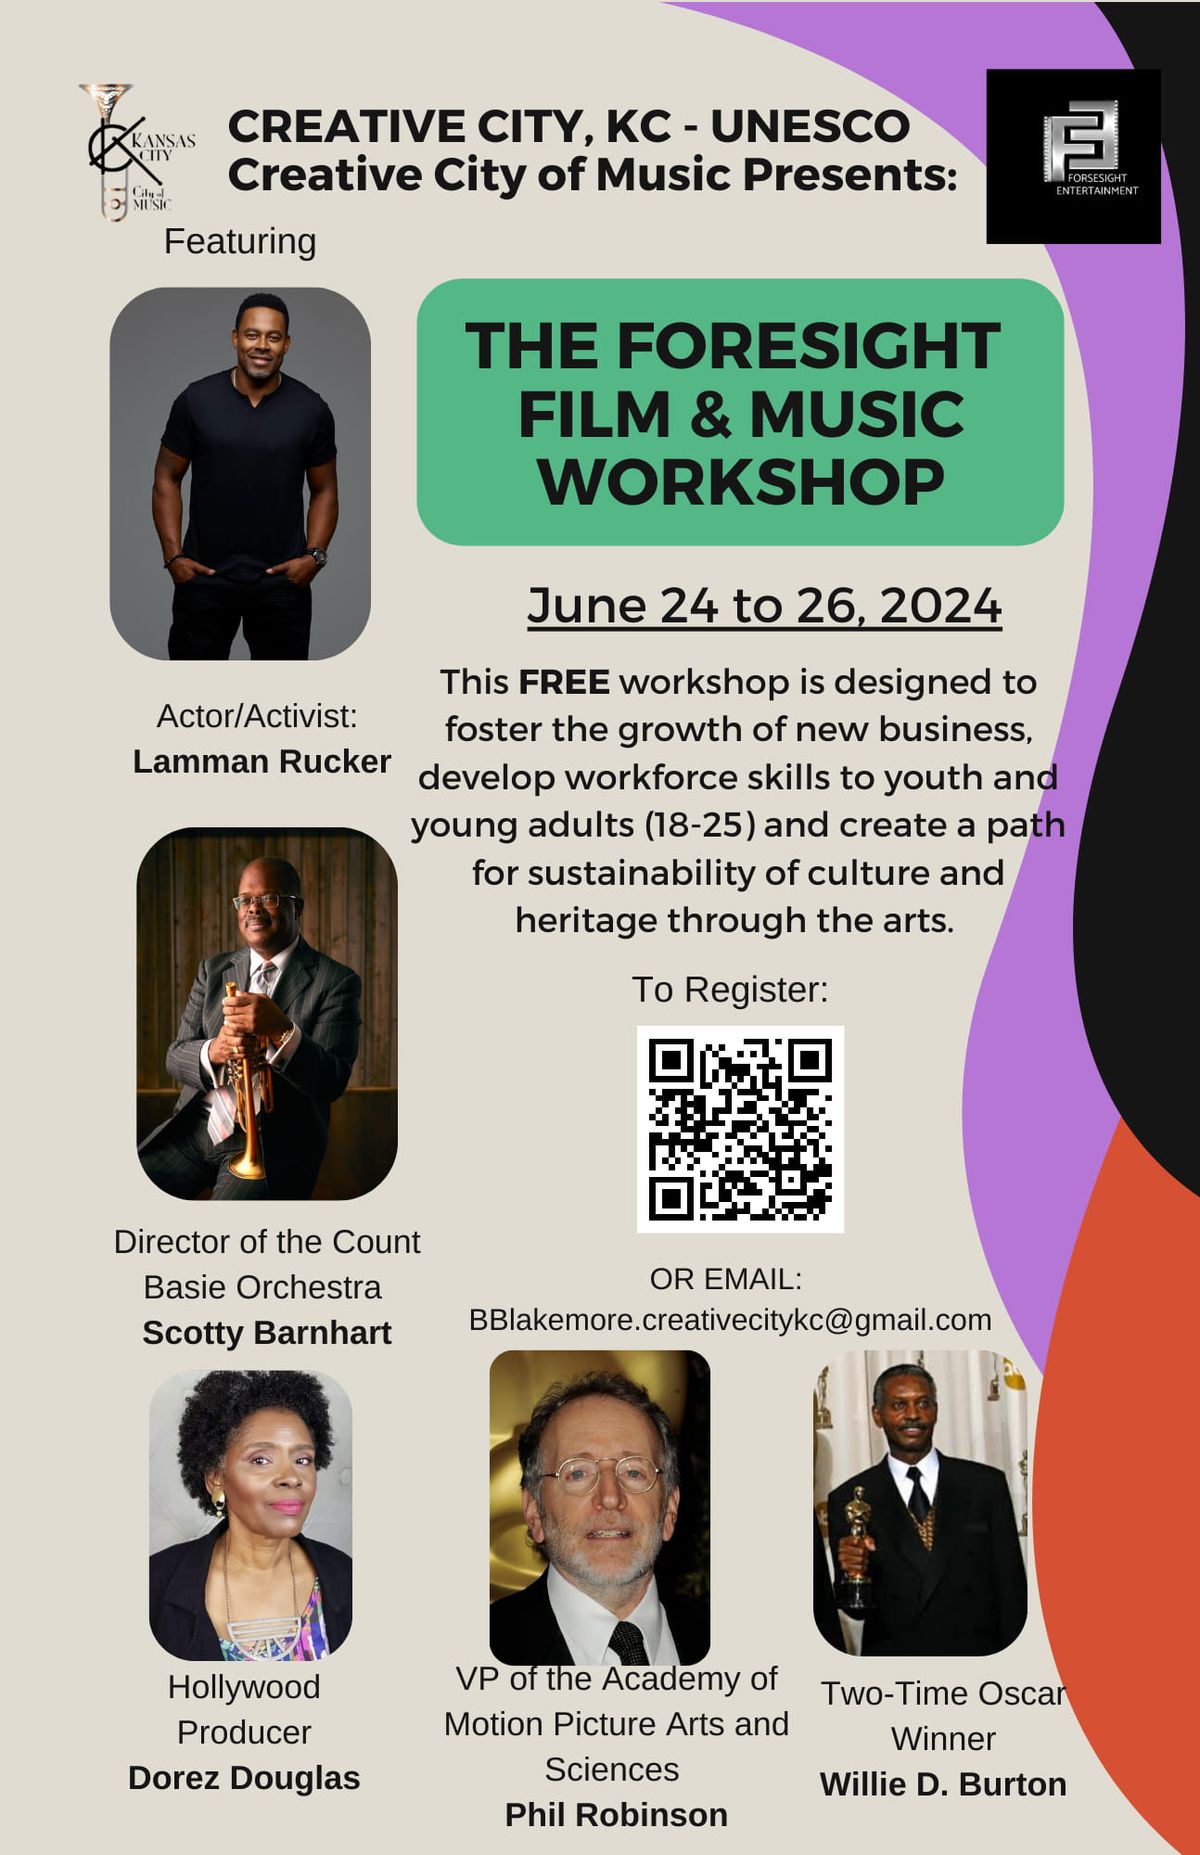 The Foresight Film and Music Workshop